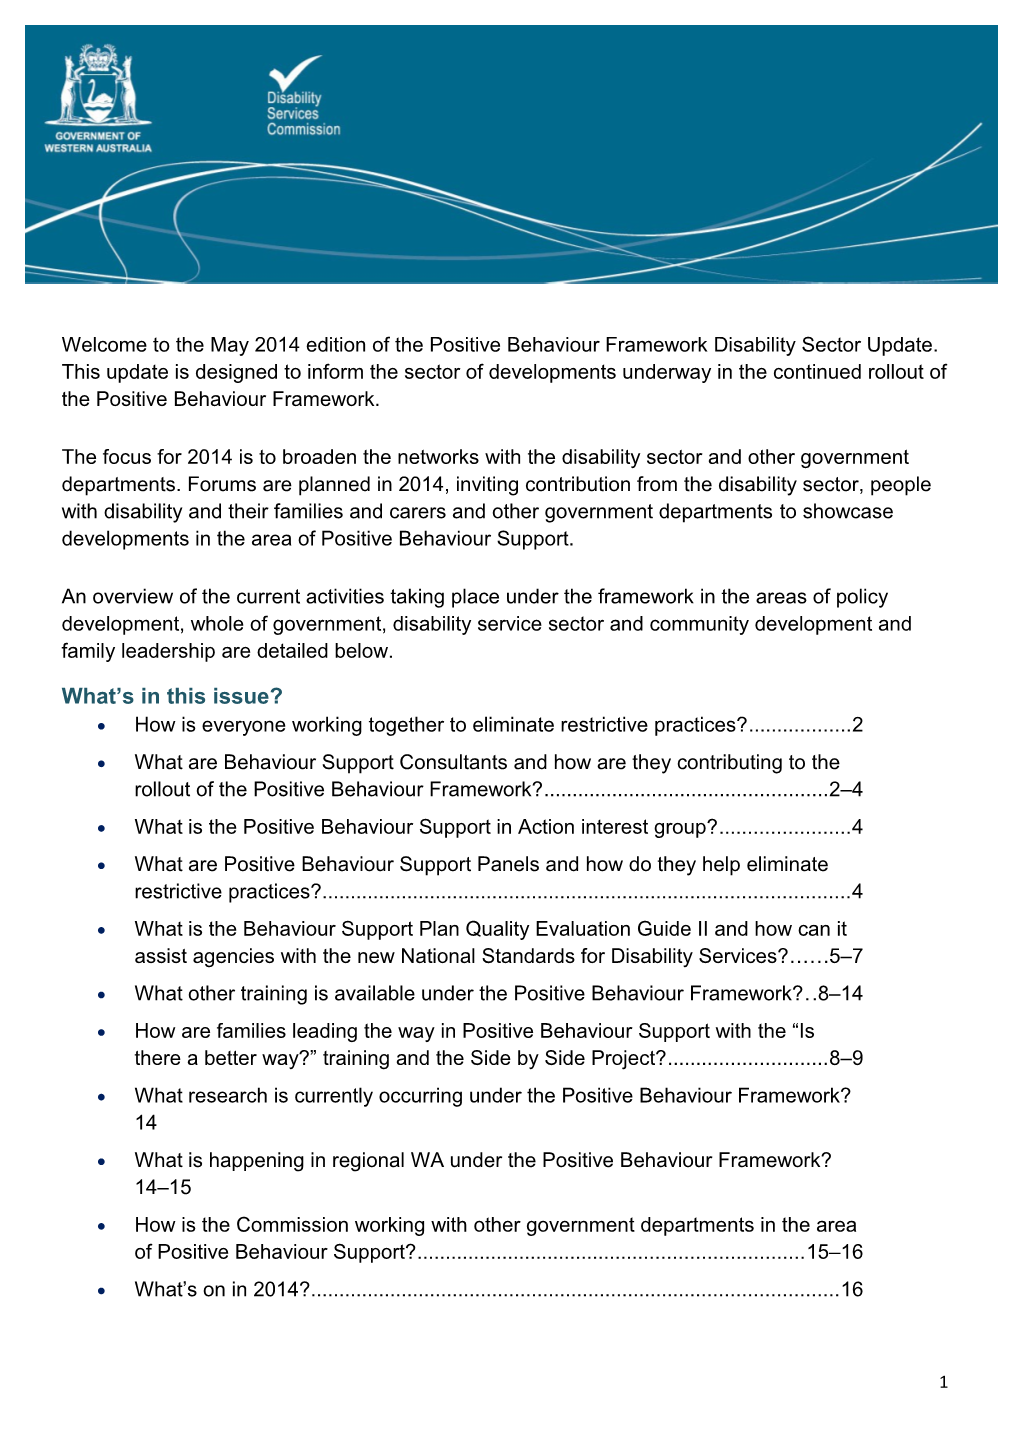 Positive Behaviour Framework Disability Sector Update, May 2014, Edition Number 5